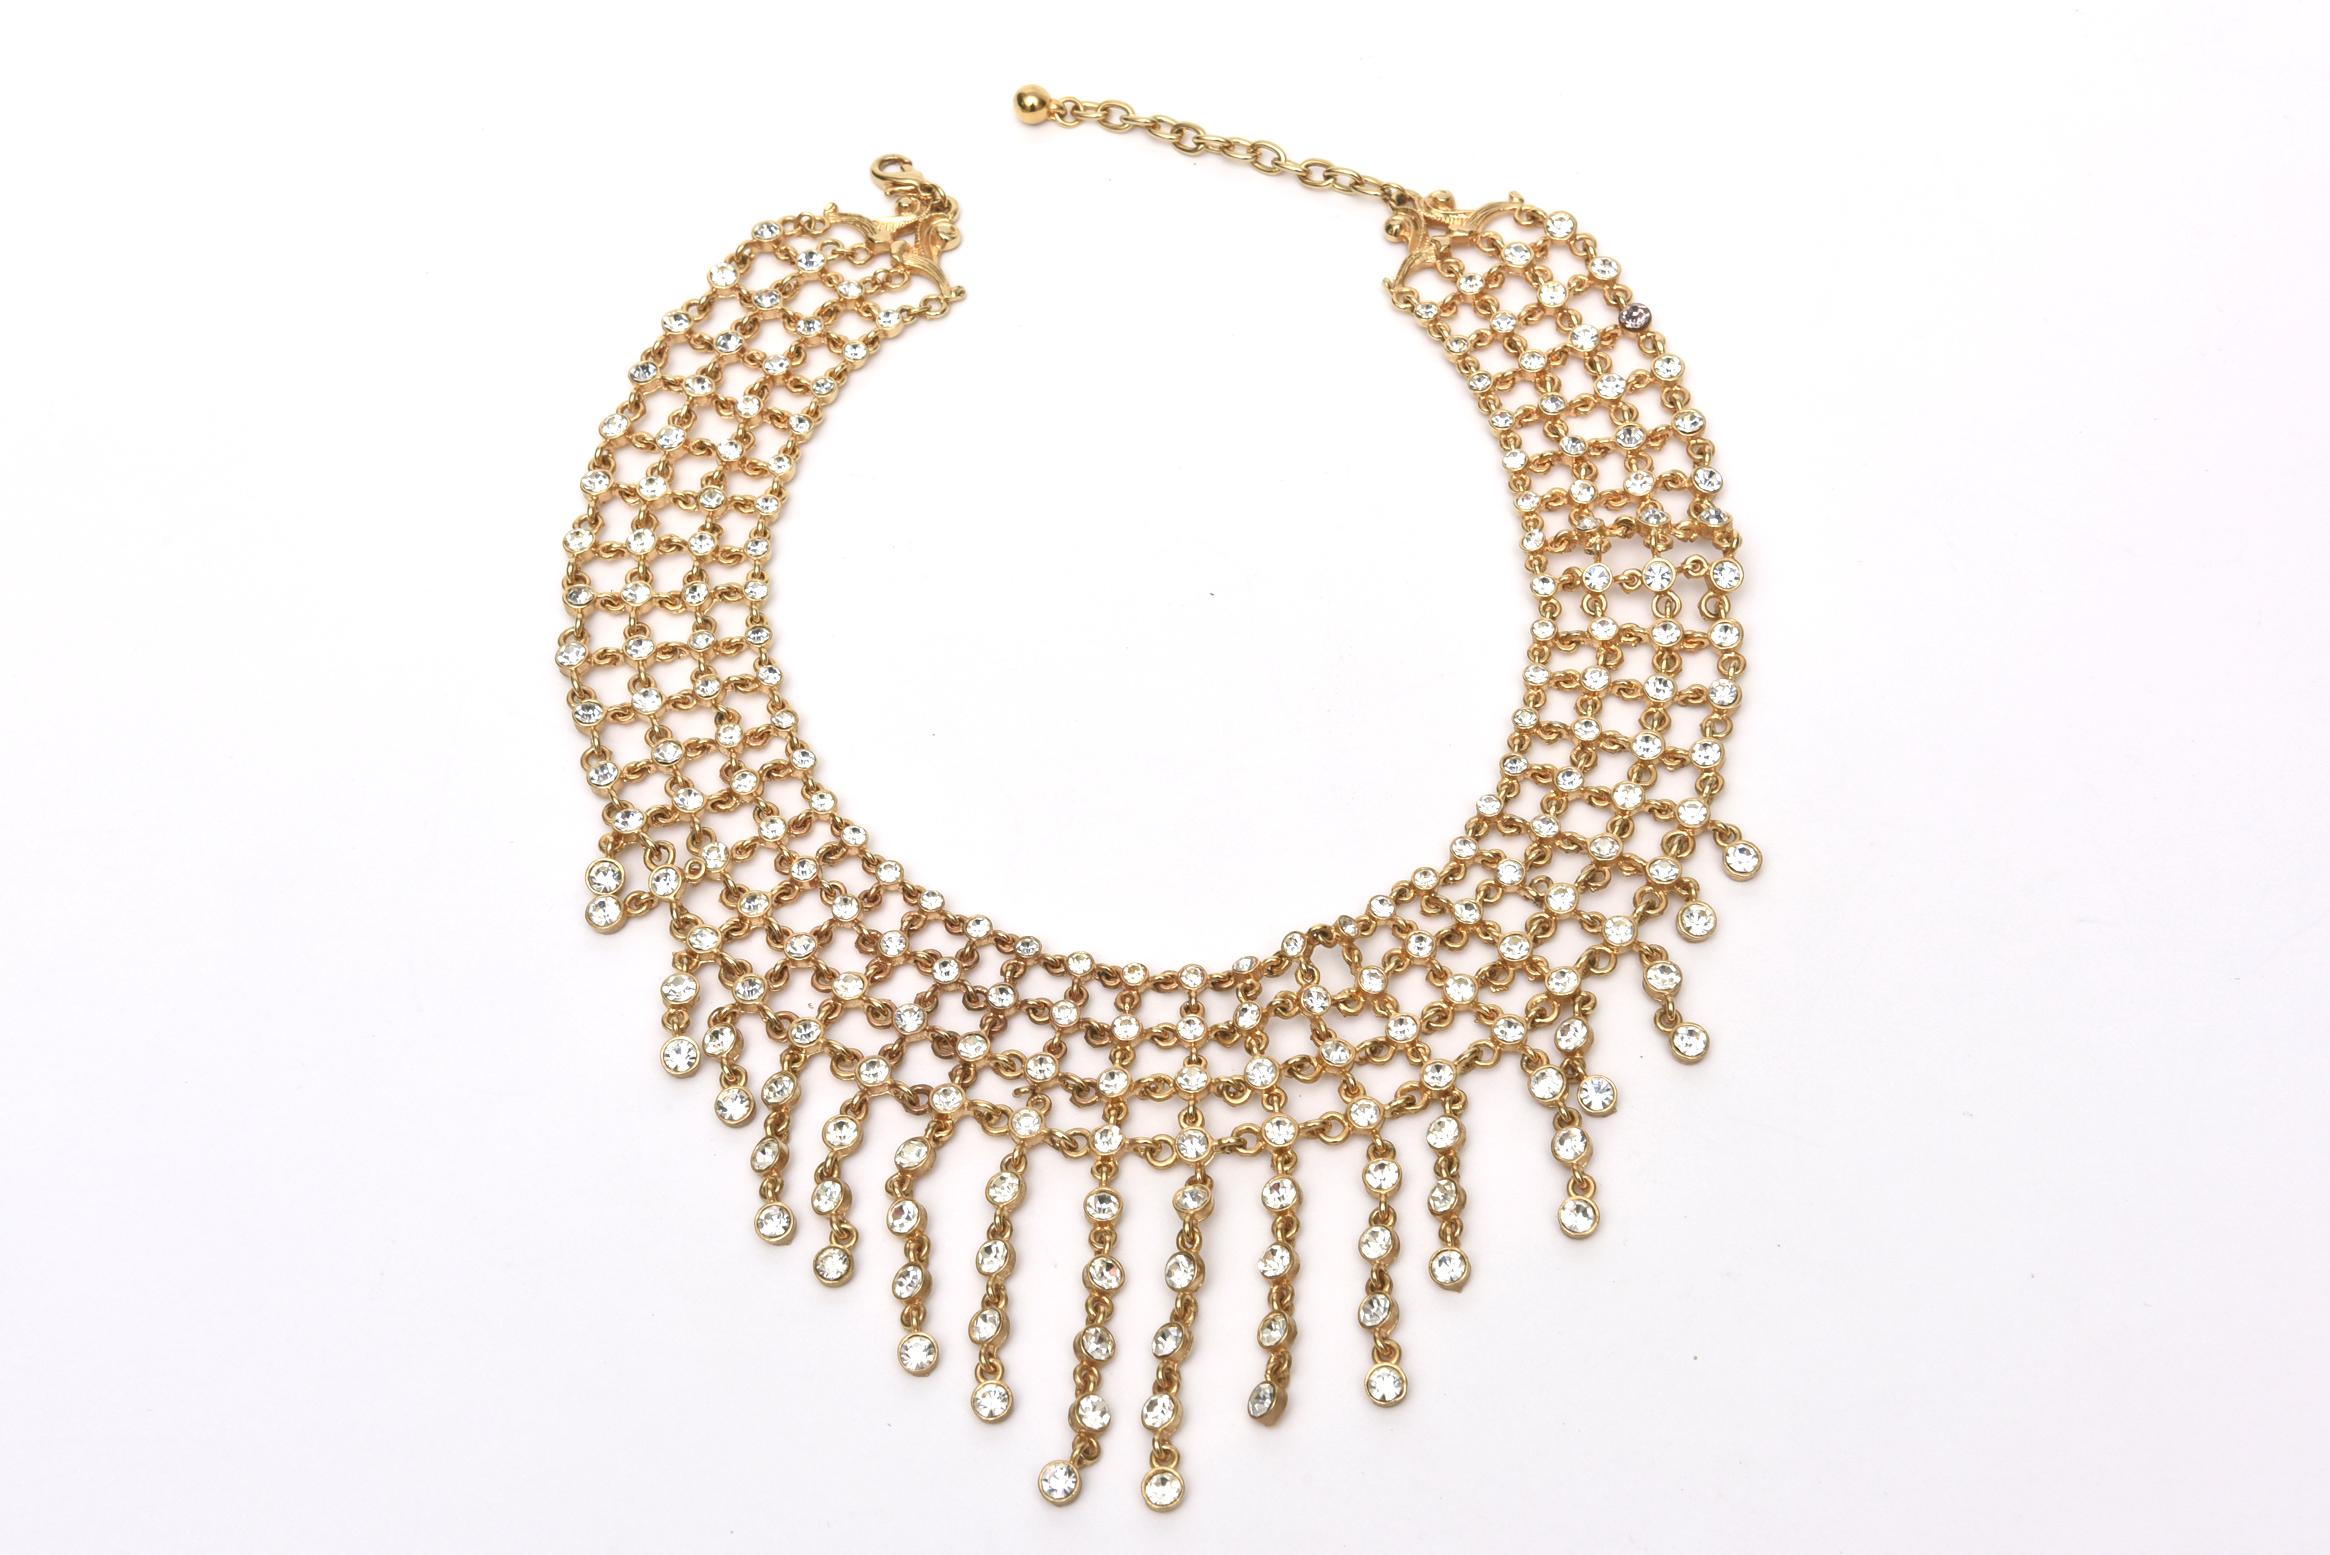  Rhinestone and Gilded Metal Bib Necklace Vintage In Good Condition For Sale In North Miami, FL